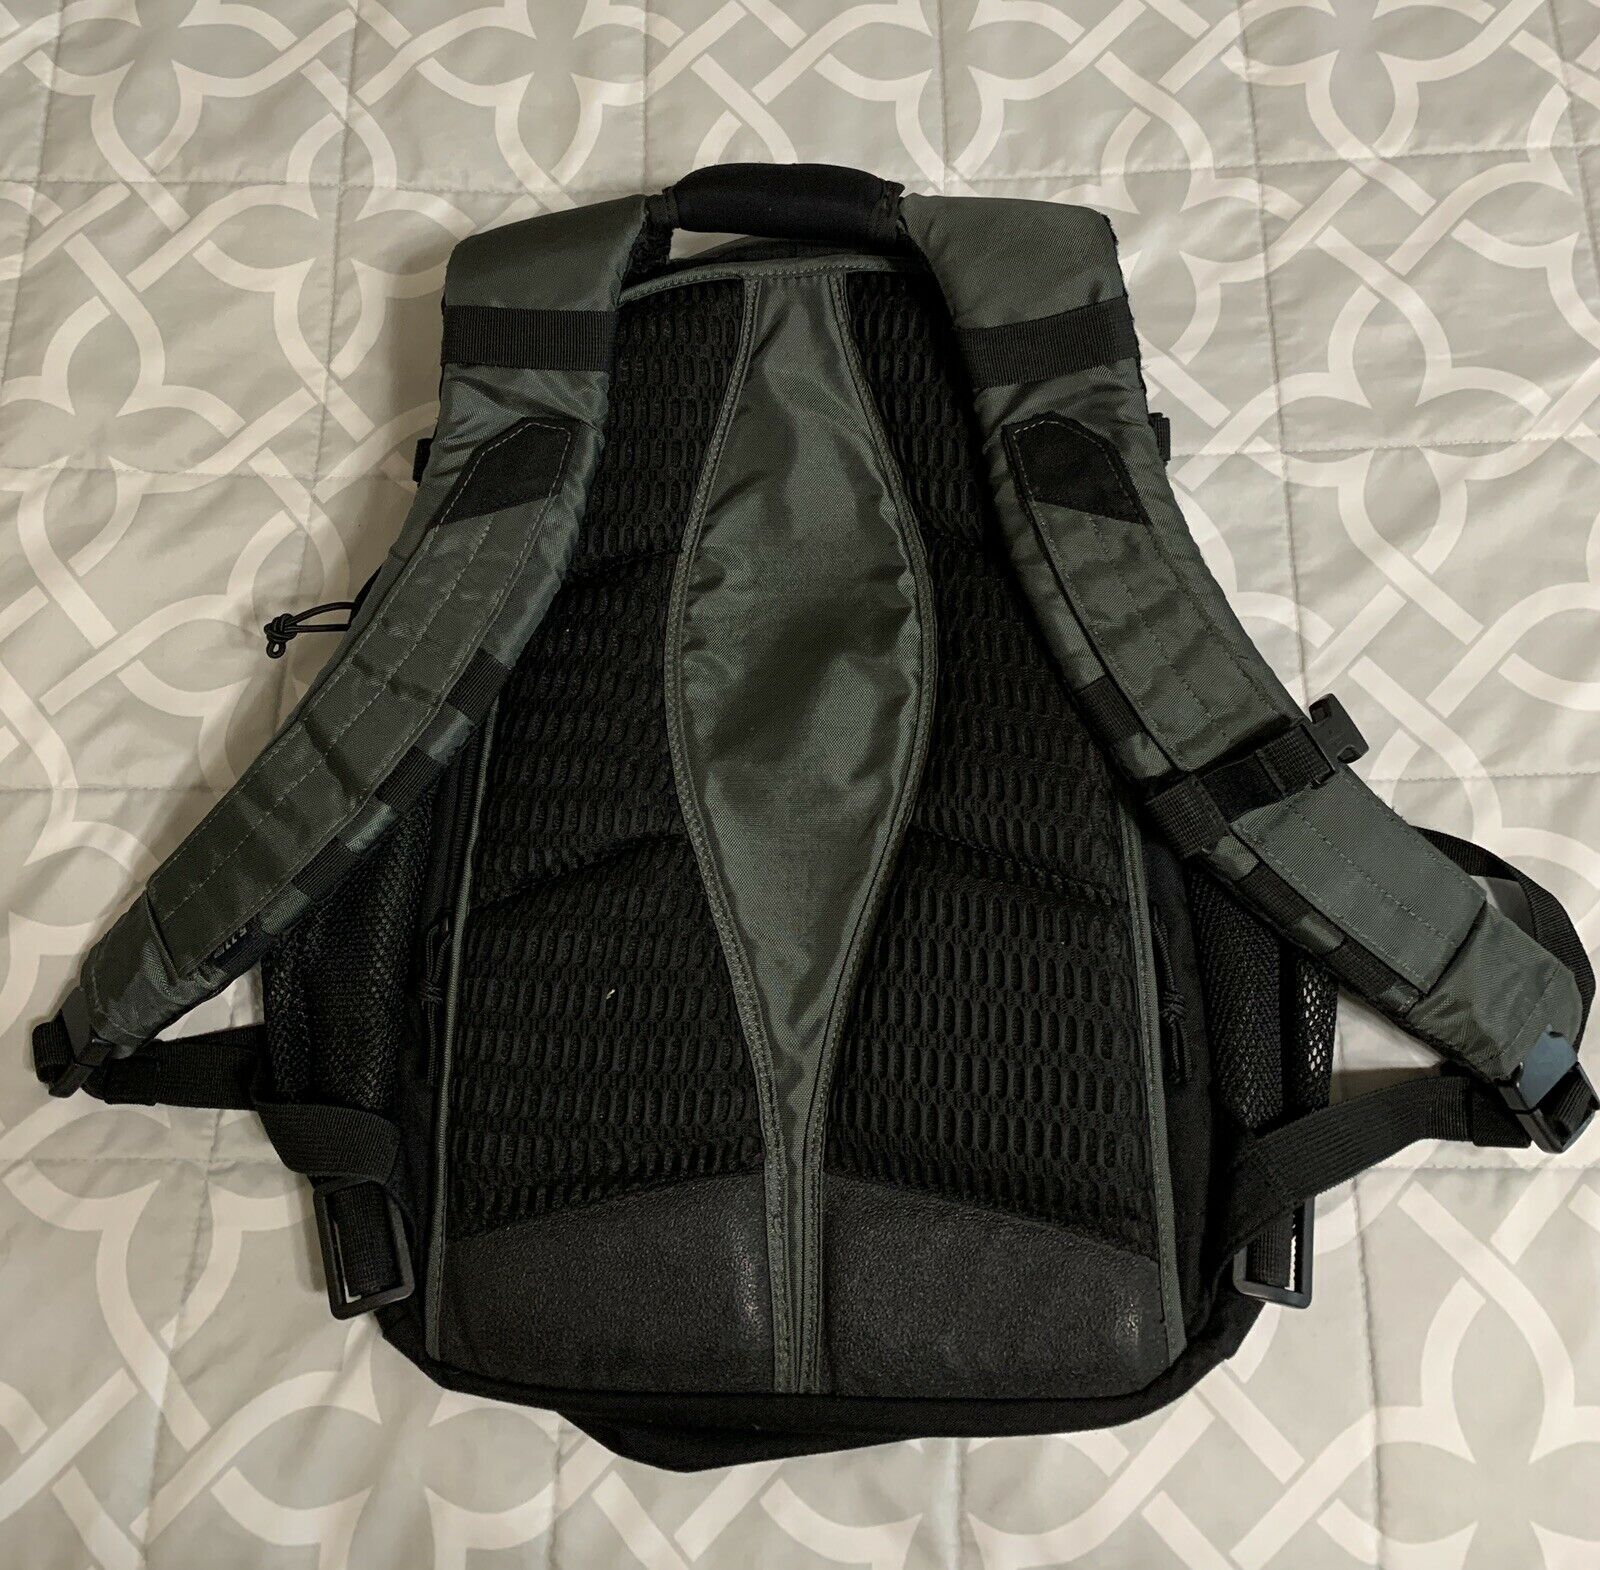 5.11 Tactical Series Covrt 18 Backpack